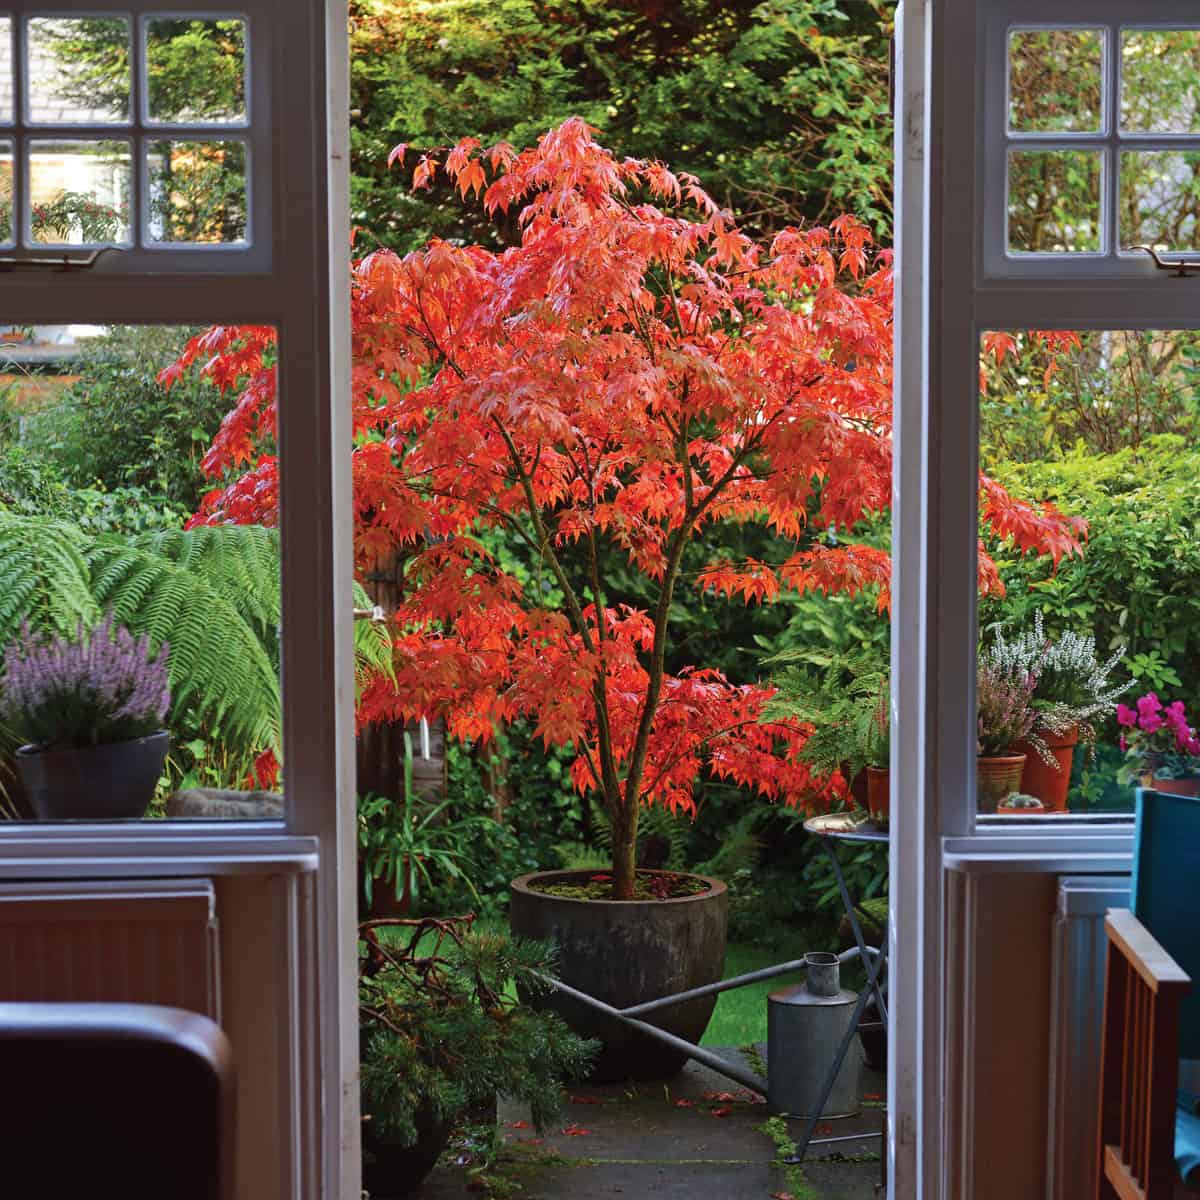 Acer (Japanese Maple) growing in a pot - in full autumn glory and framed in a garden doorway